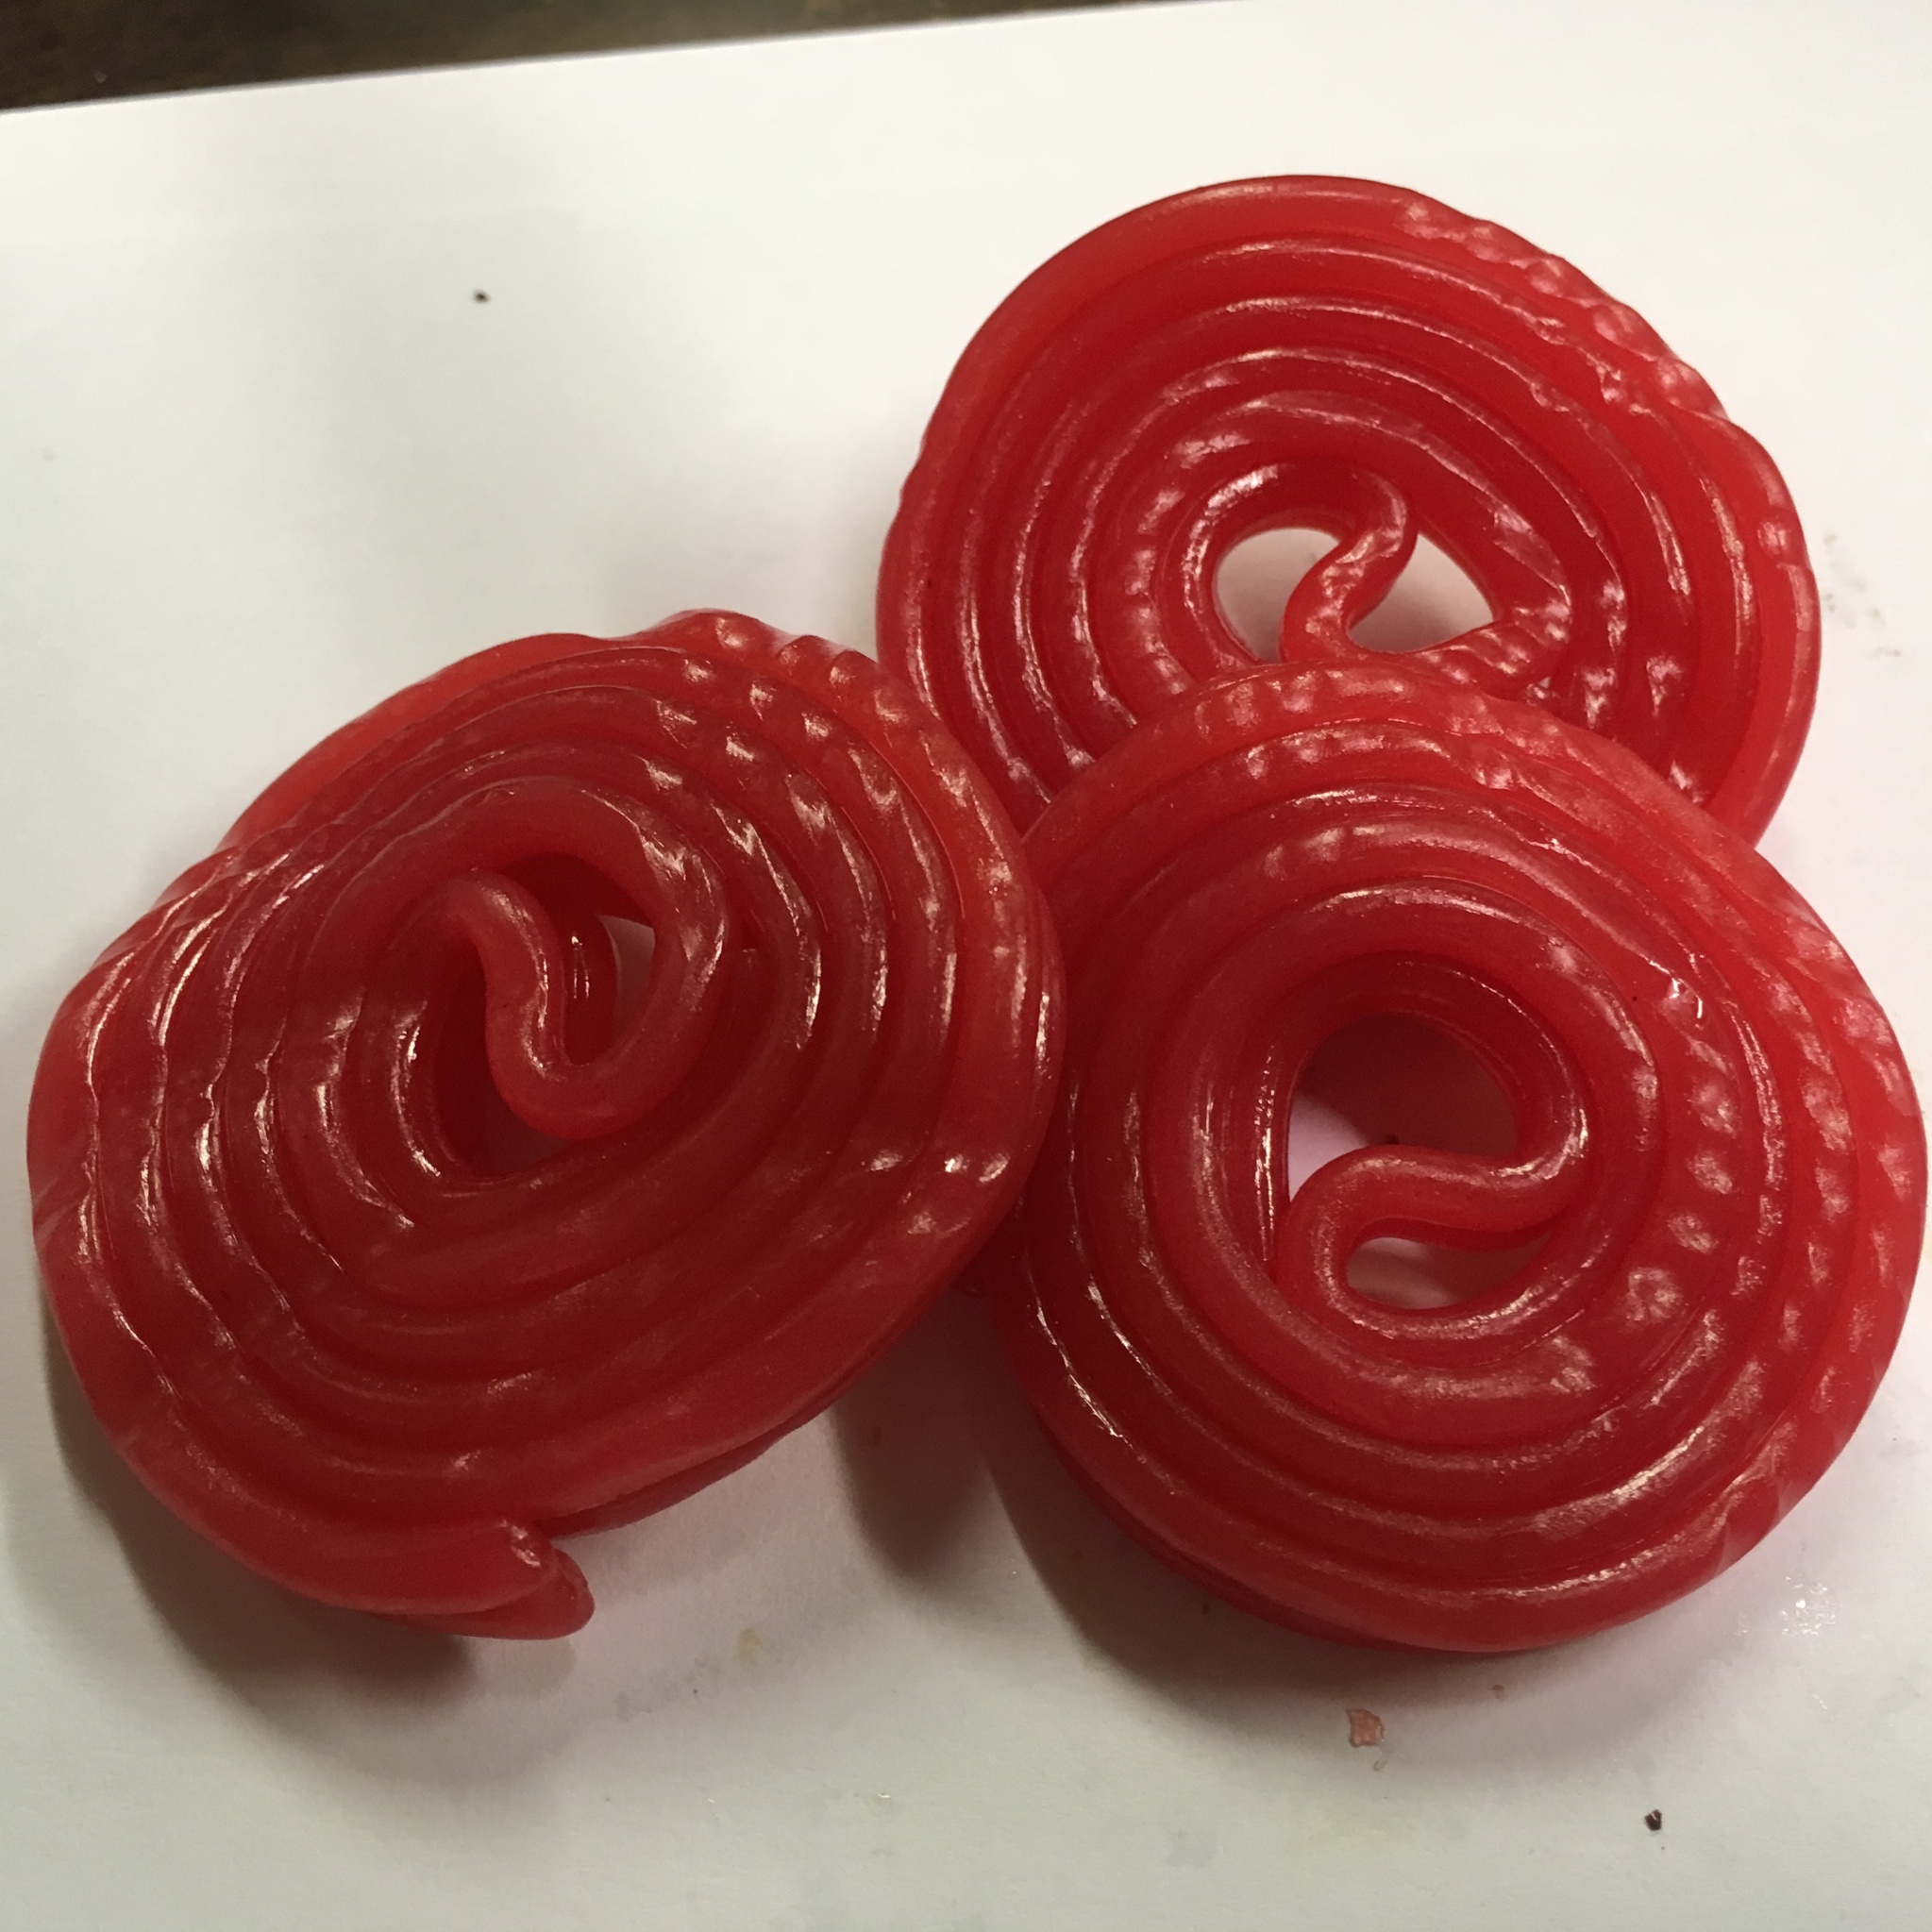 Red licorice rope in a wheel